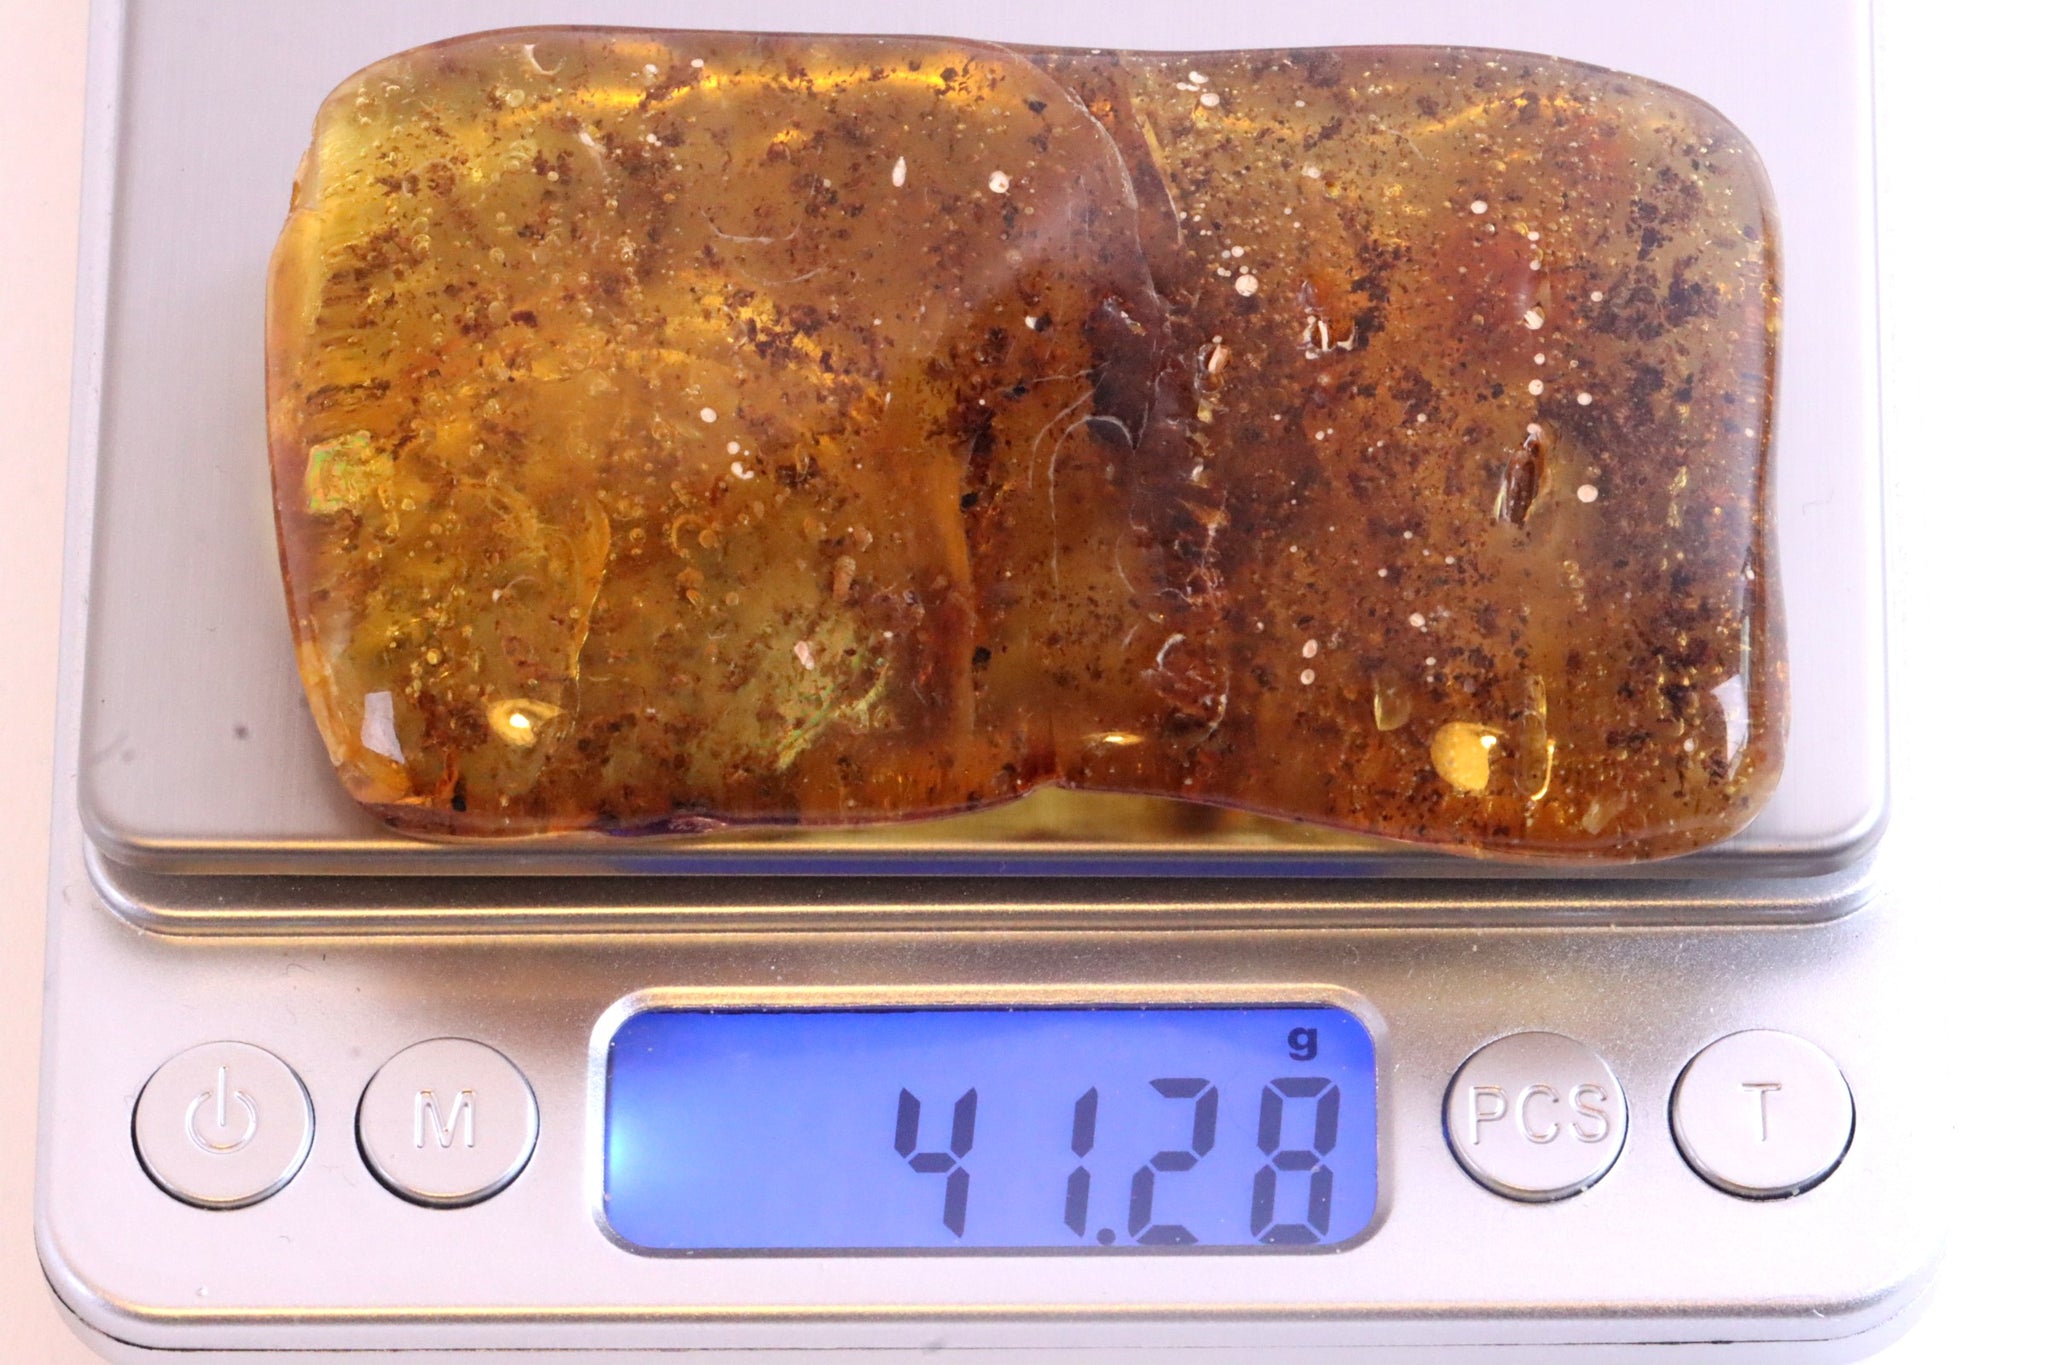 Smooth Baltic Amber Gemstone with 1000s Of Air Bubbles